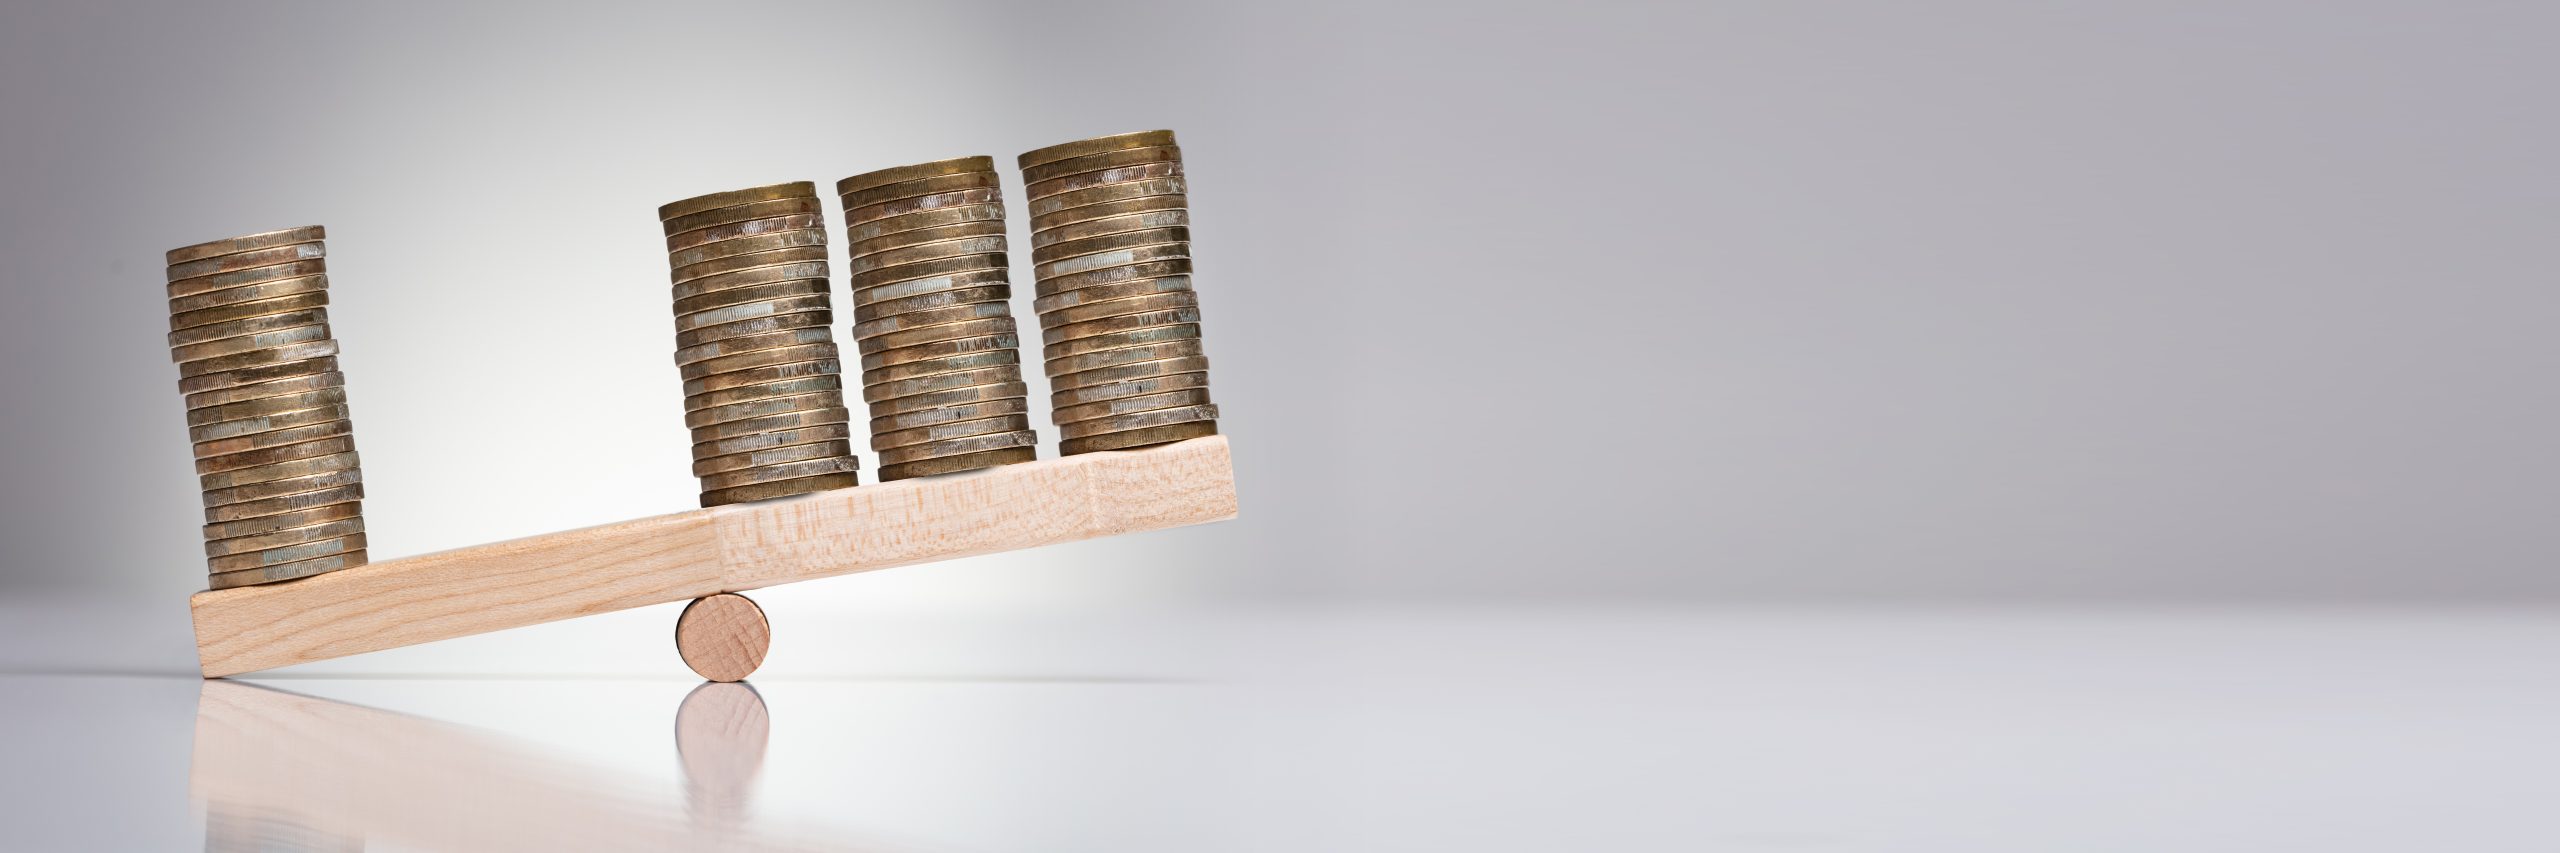 Stack Of Coins On Wooden Seesaw Over Gray Background